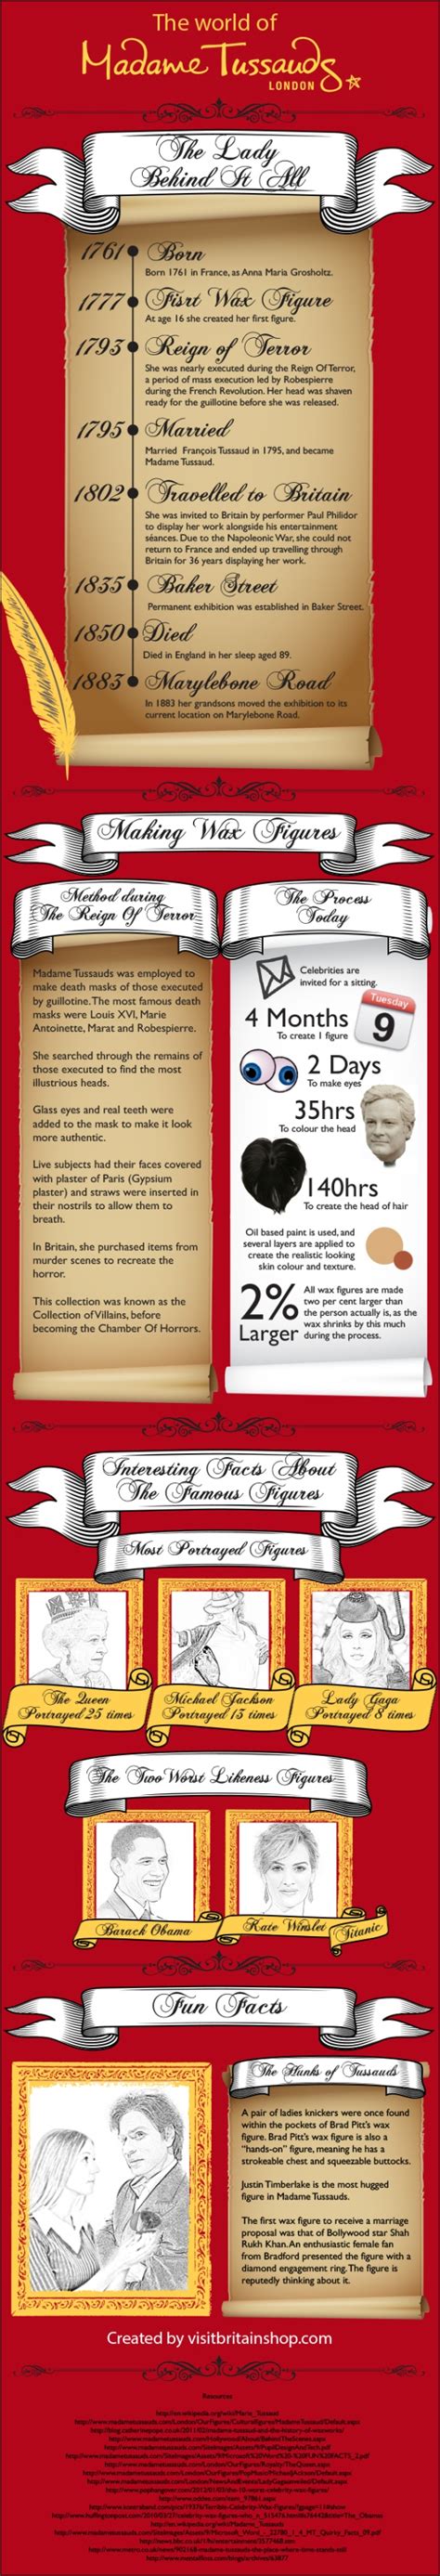 a history of madame tussauds infographic visitbritain usa